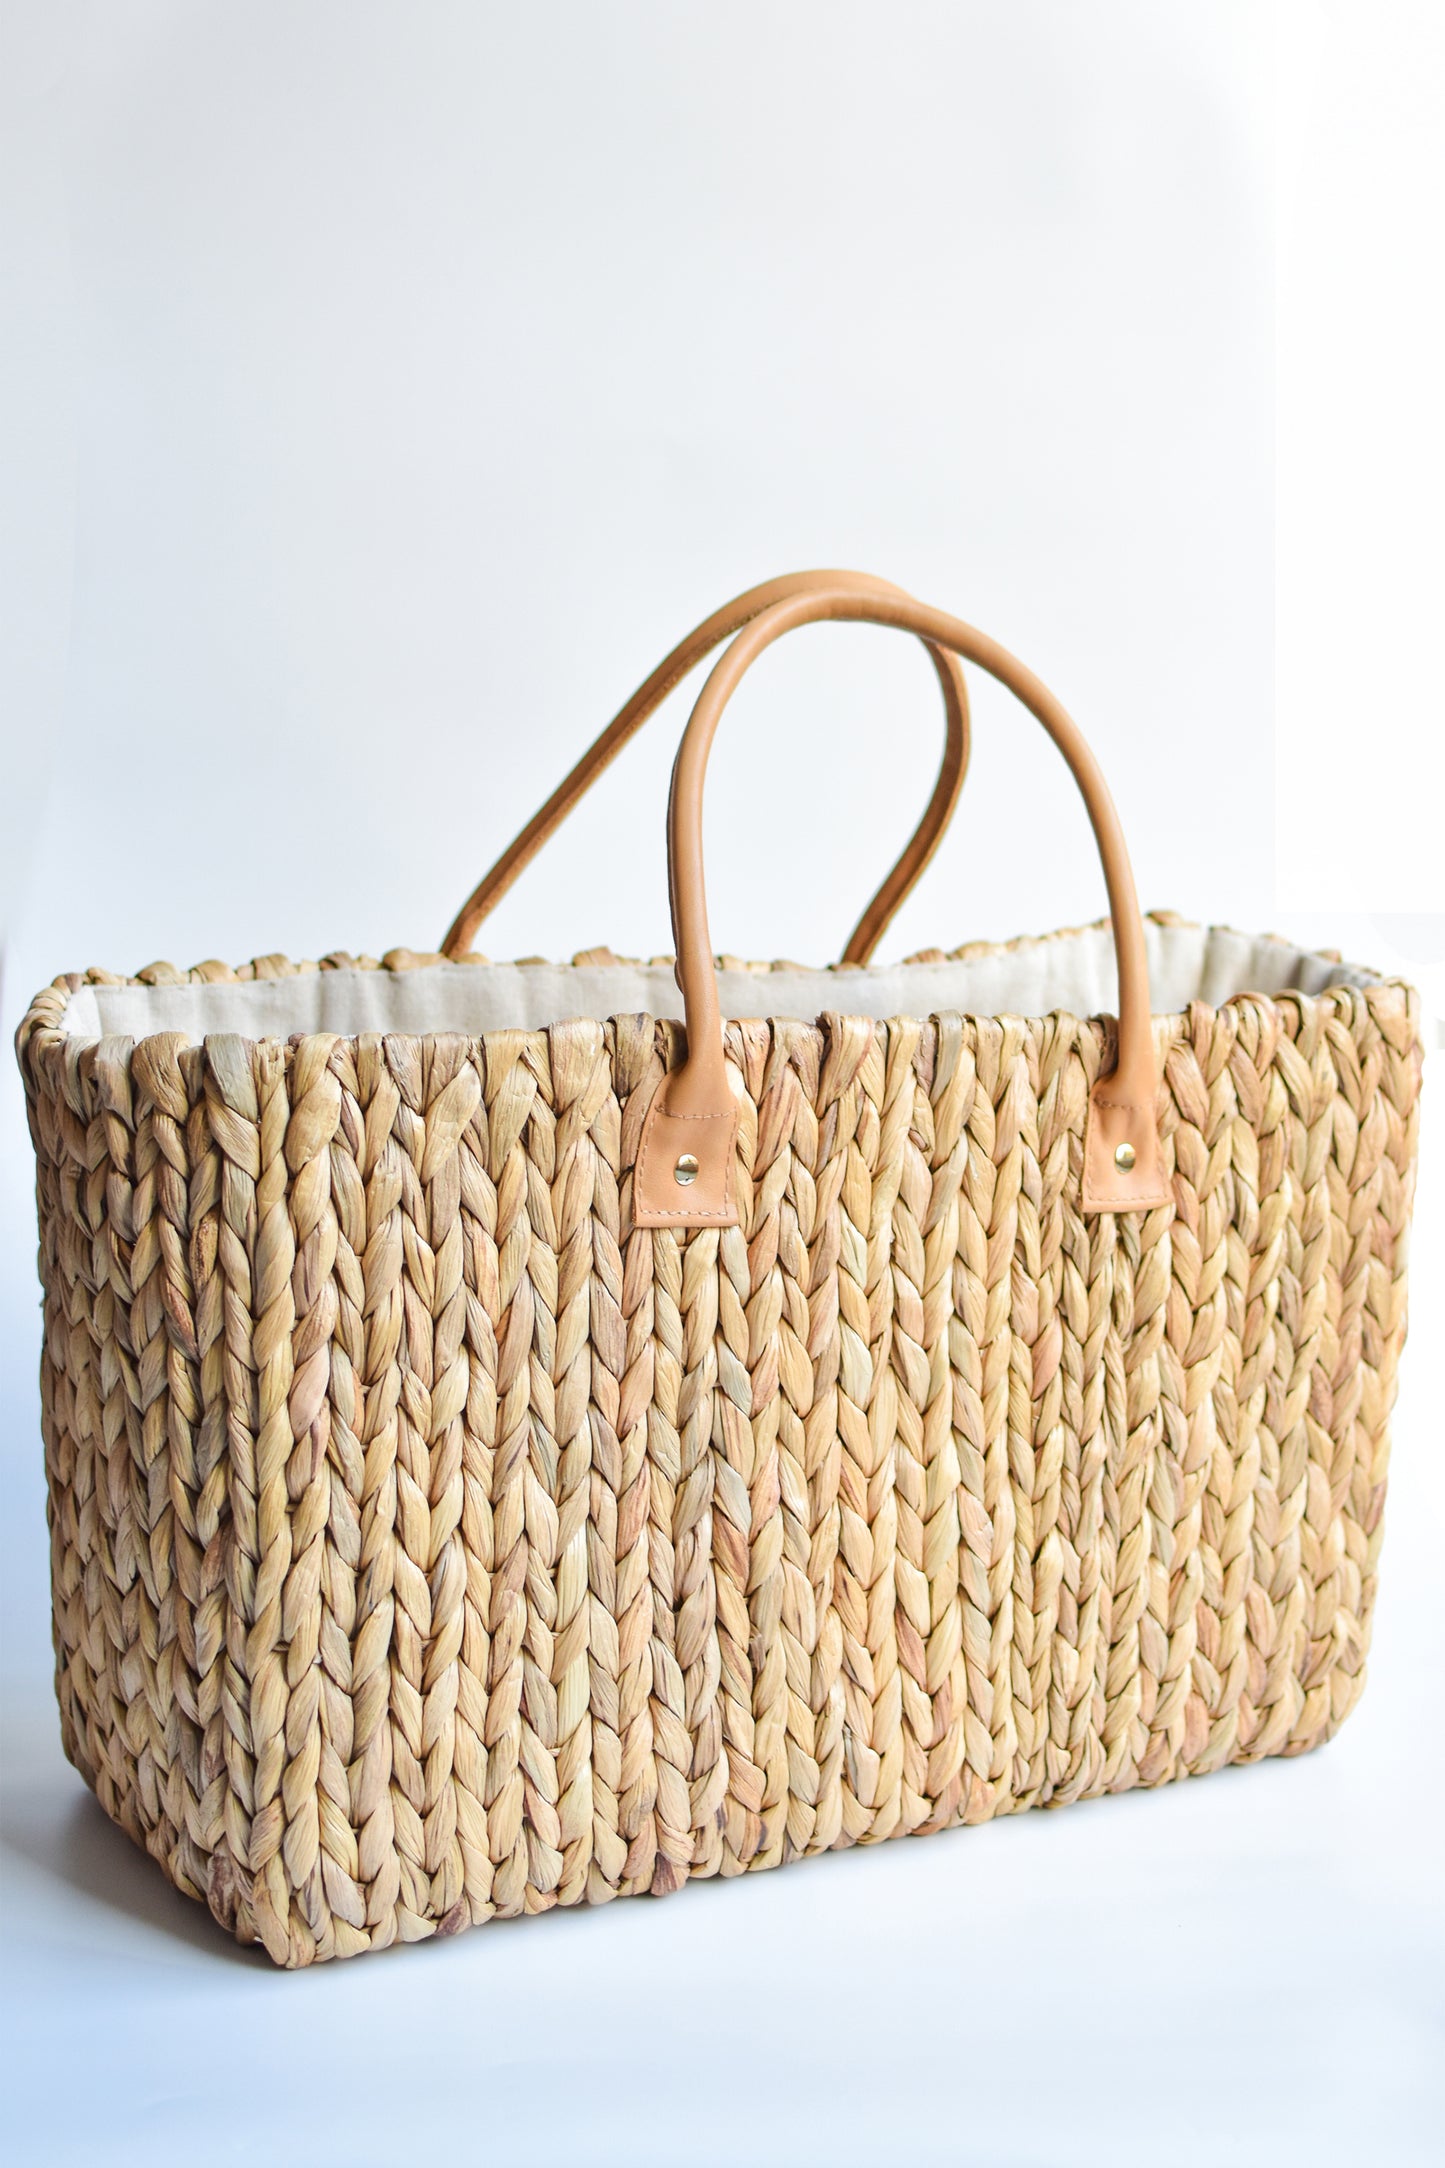 Extra large natural hyacinth straw tote with matching leather handles. 